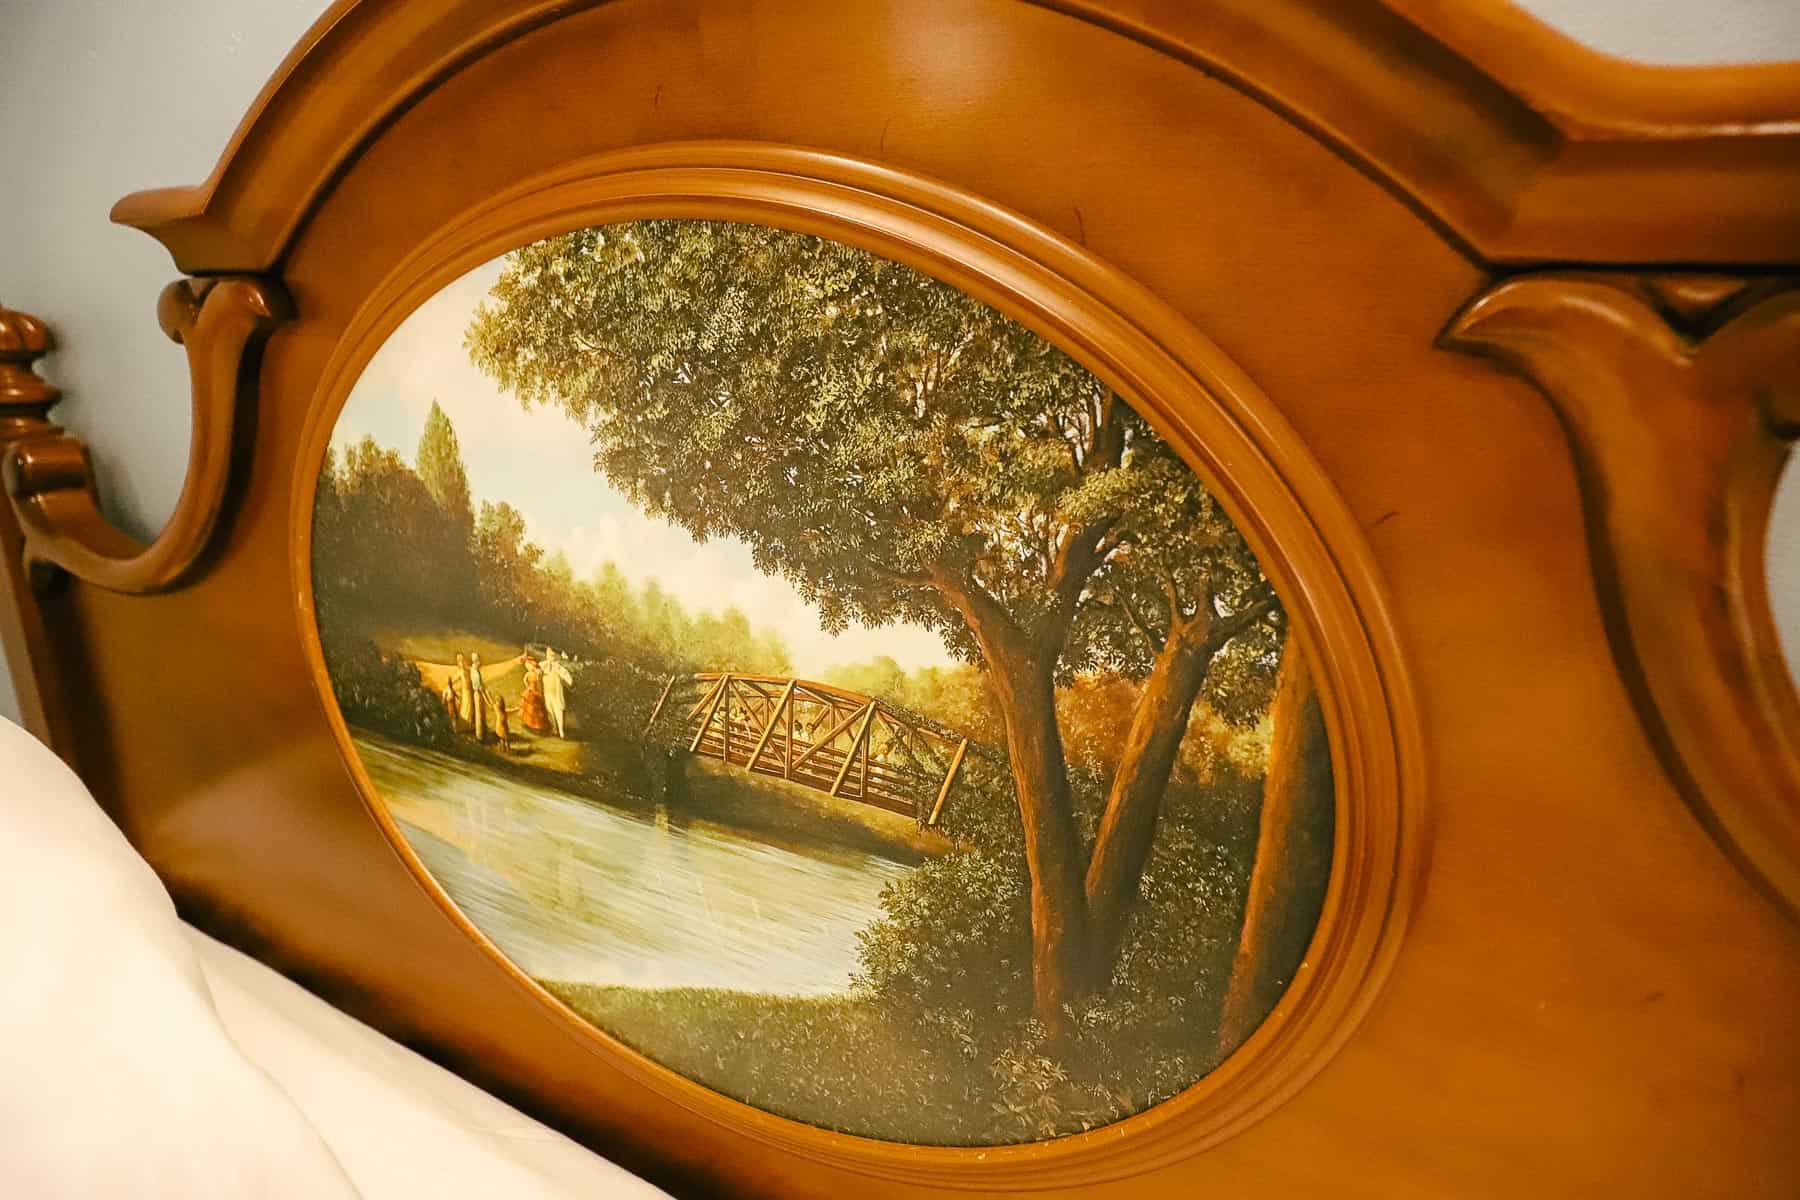 The Magnolia Bend rooms feature headboards with design elements from The Princess and the Frog. 